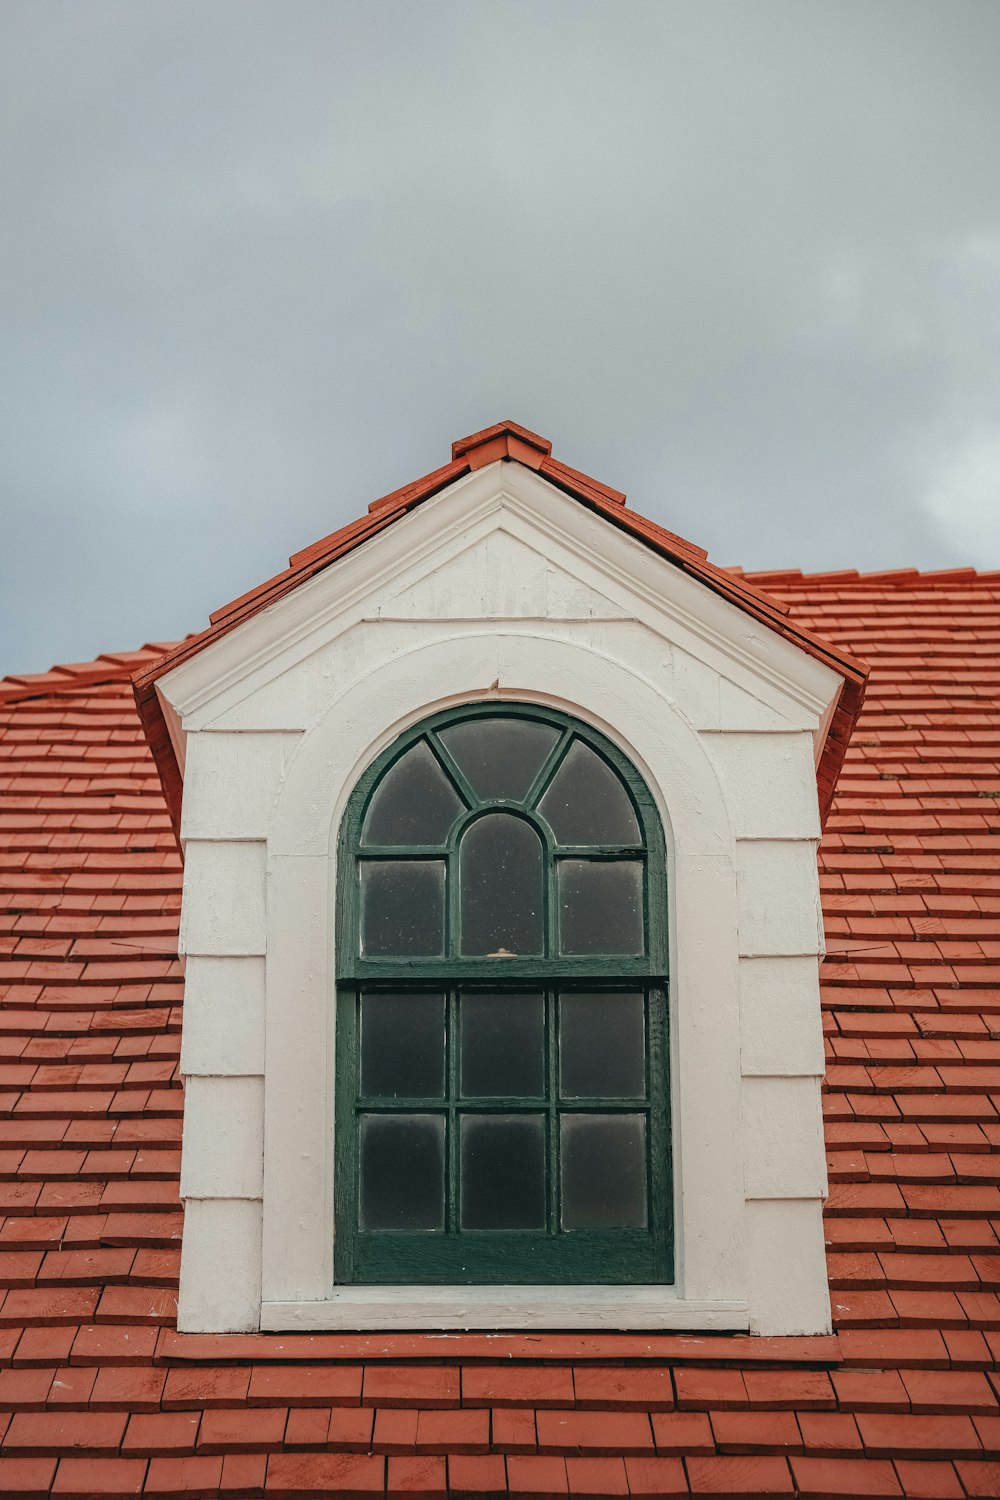 a red roof with a green window and a red tiled roof